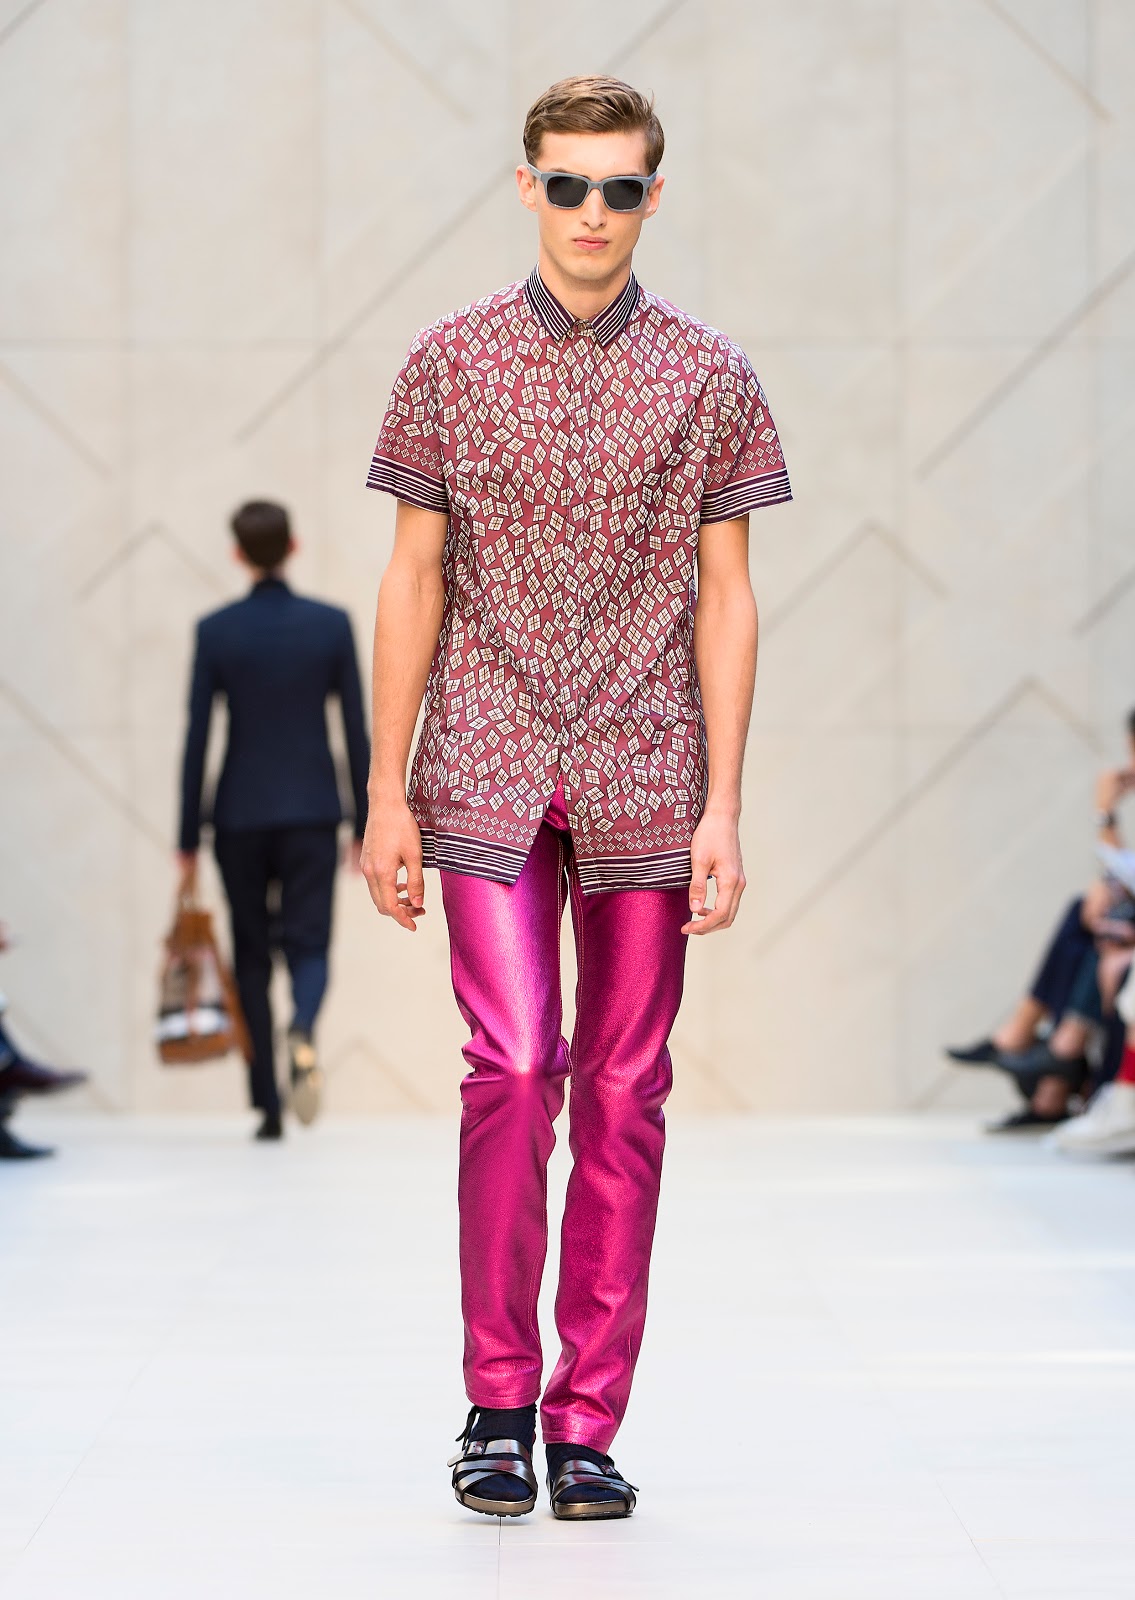 The Style Examiner: Burberry Prorsum Menswear Spring/Summer 2013